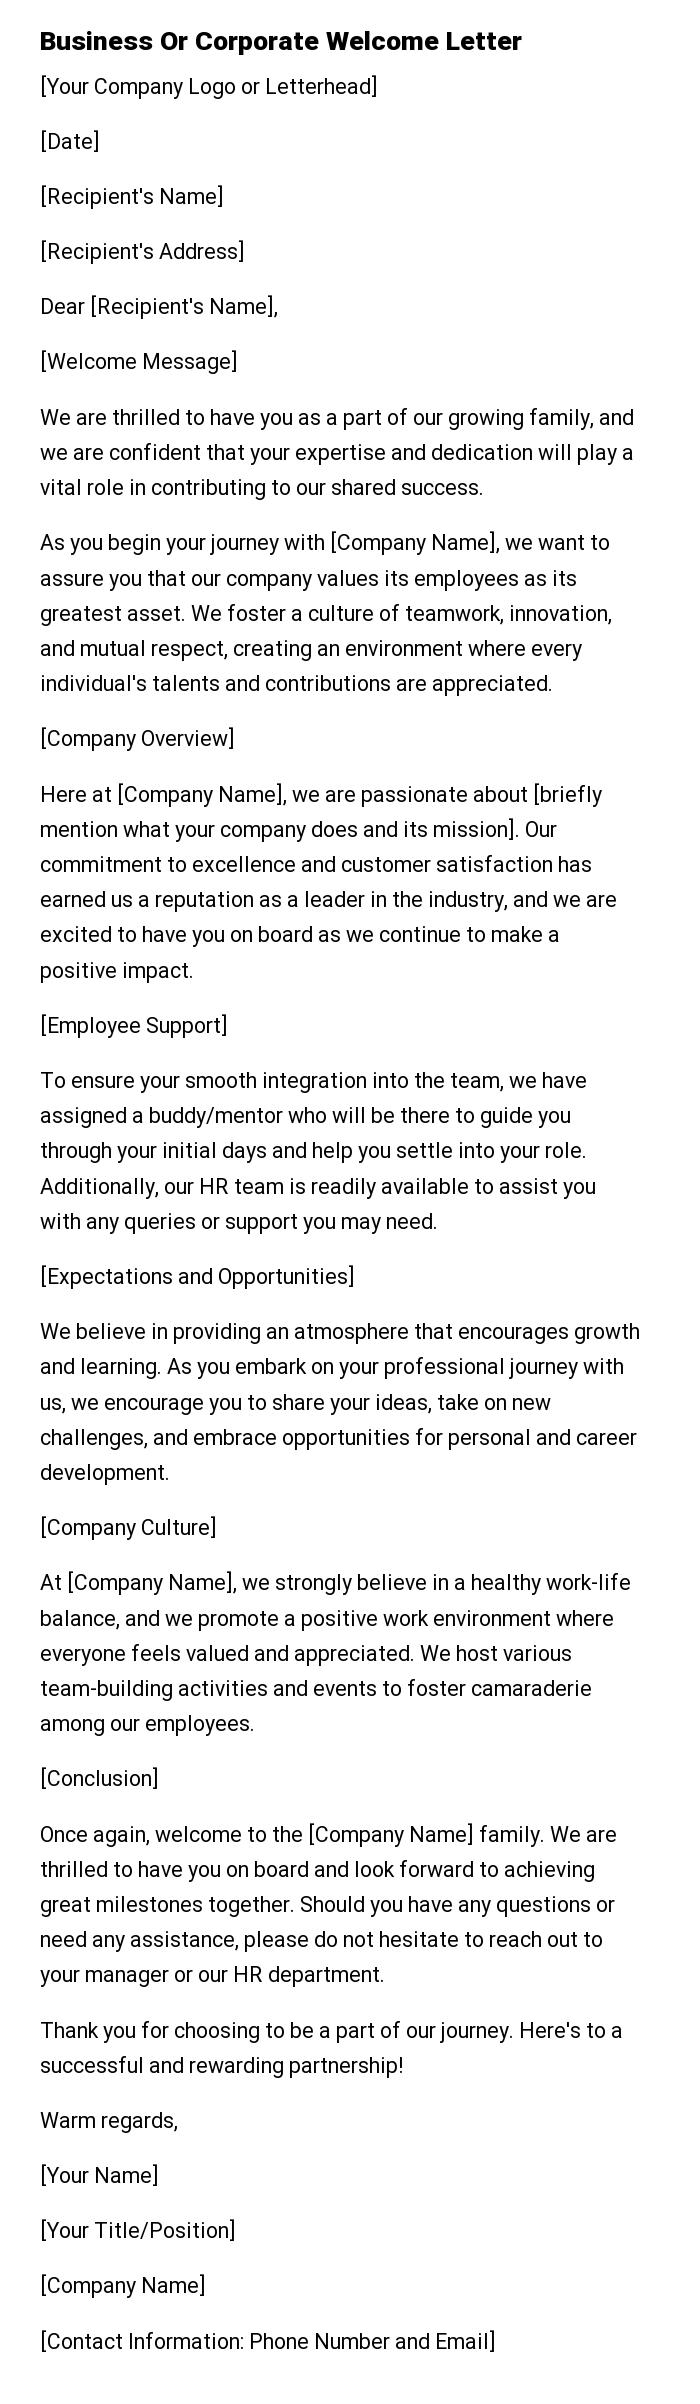 Business Or Corporate Welcome Letter